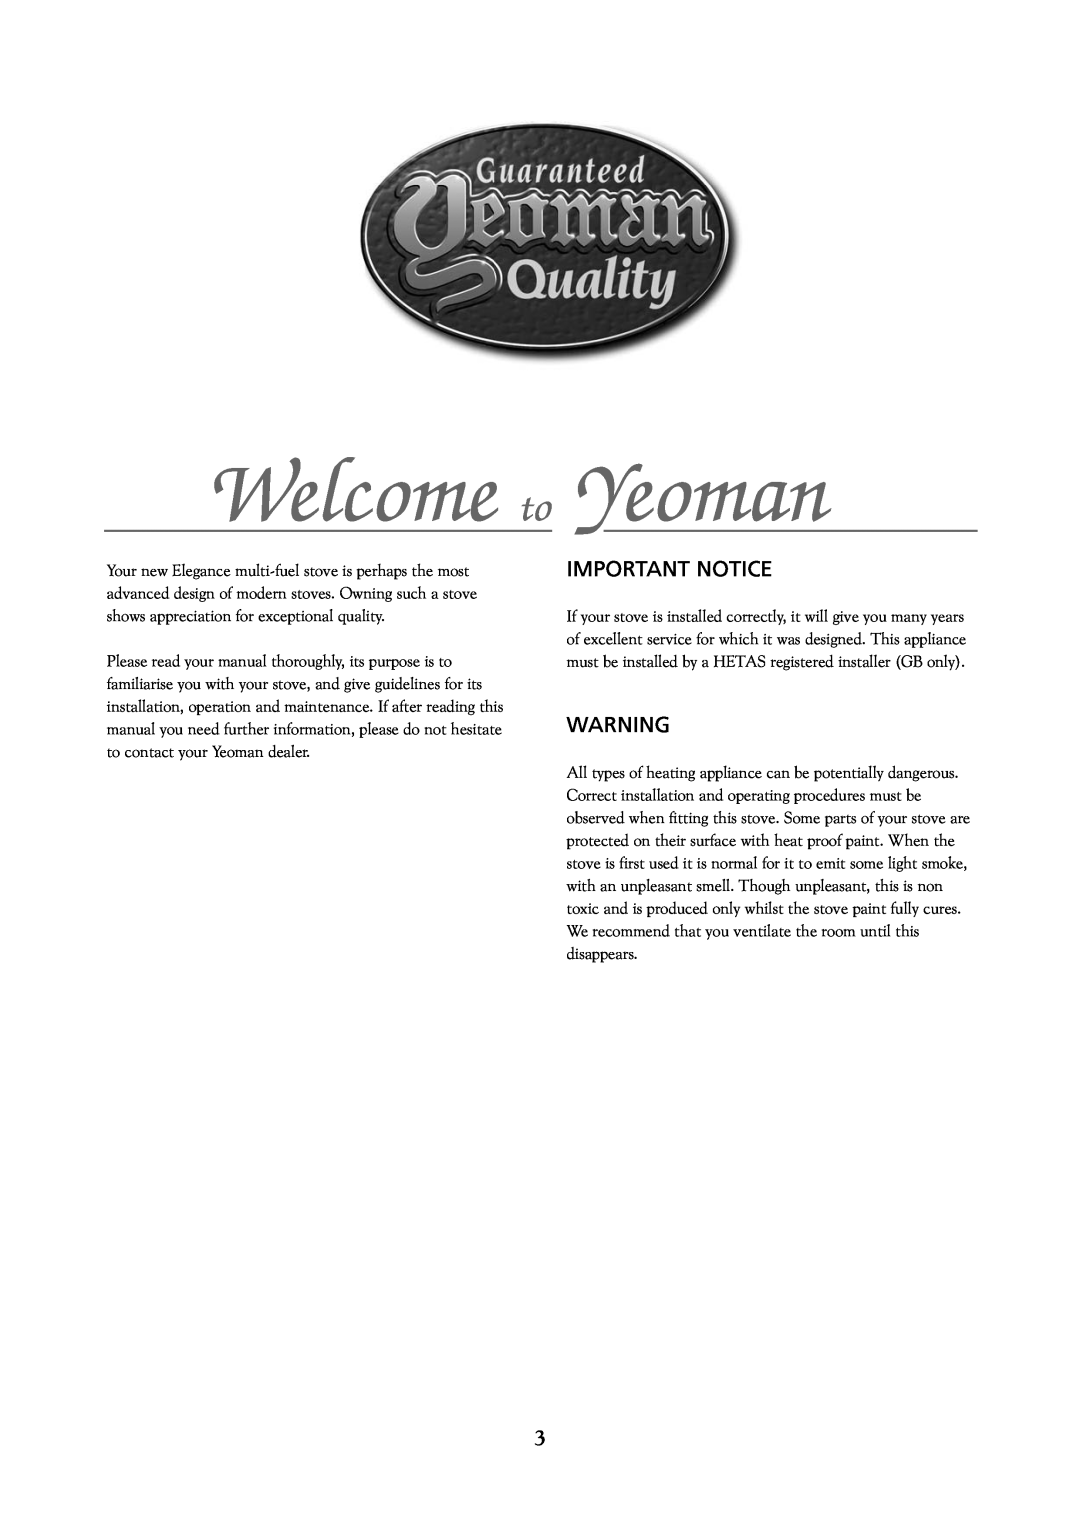 Yeoman 220, 250, 200, 280, 210, 240, 270 manual Welcome to Yeoman, Important Notice 